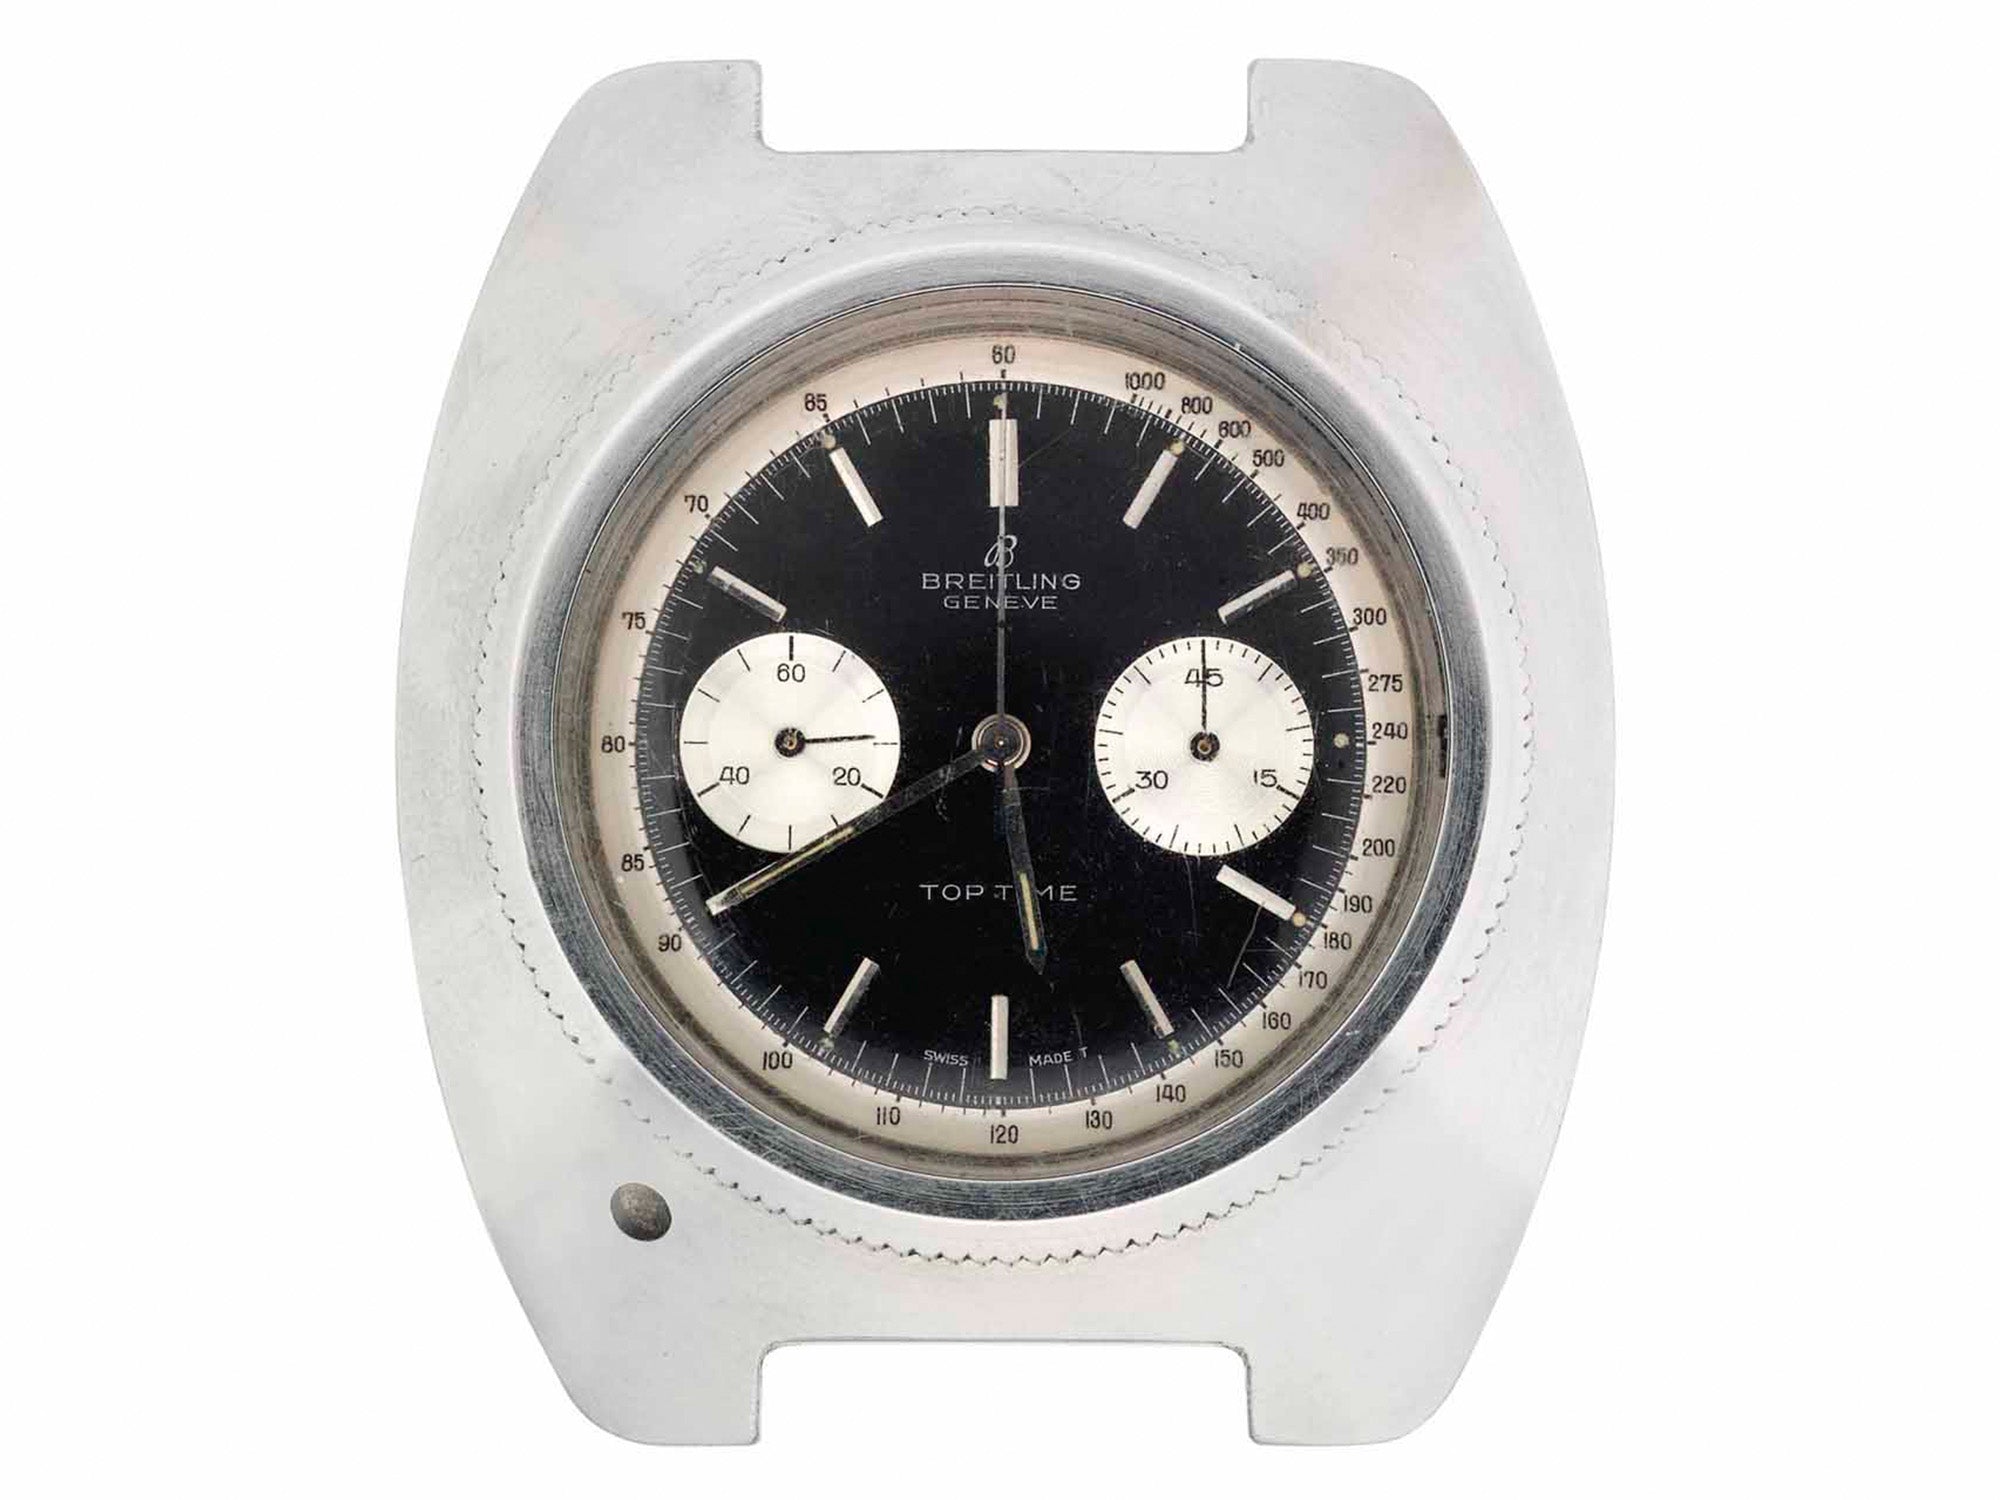 Breitling Top Time Thunderball watch 1965